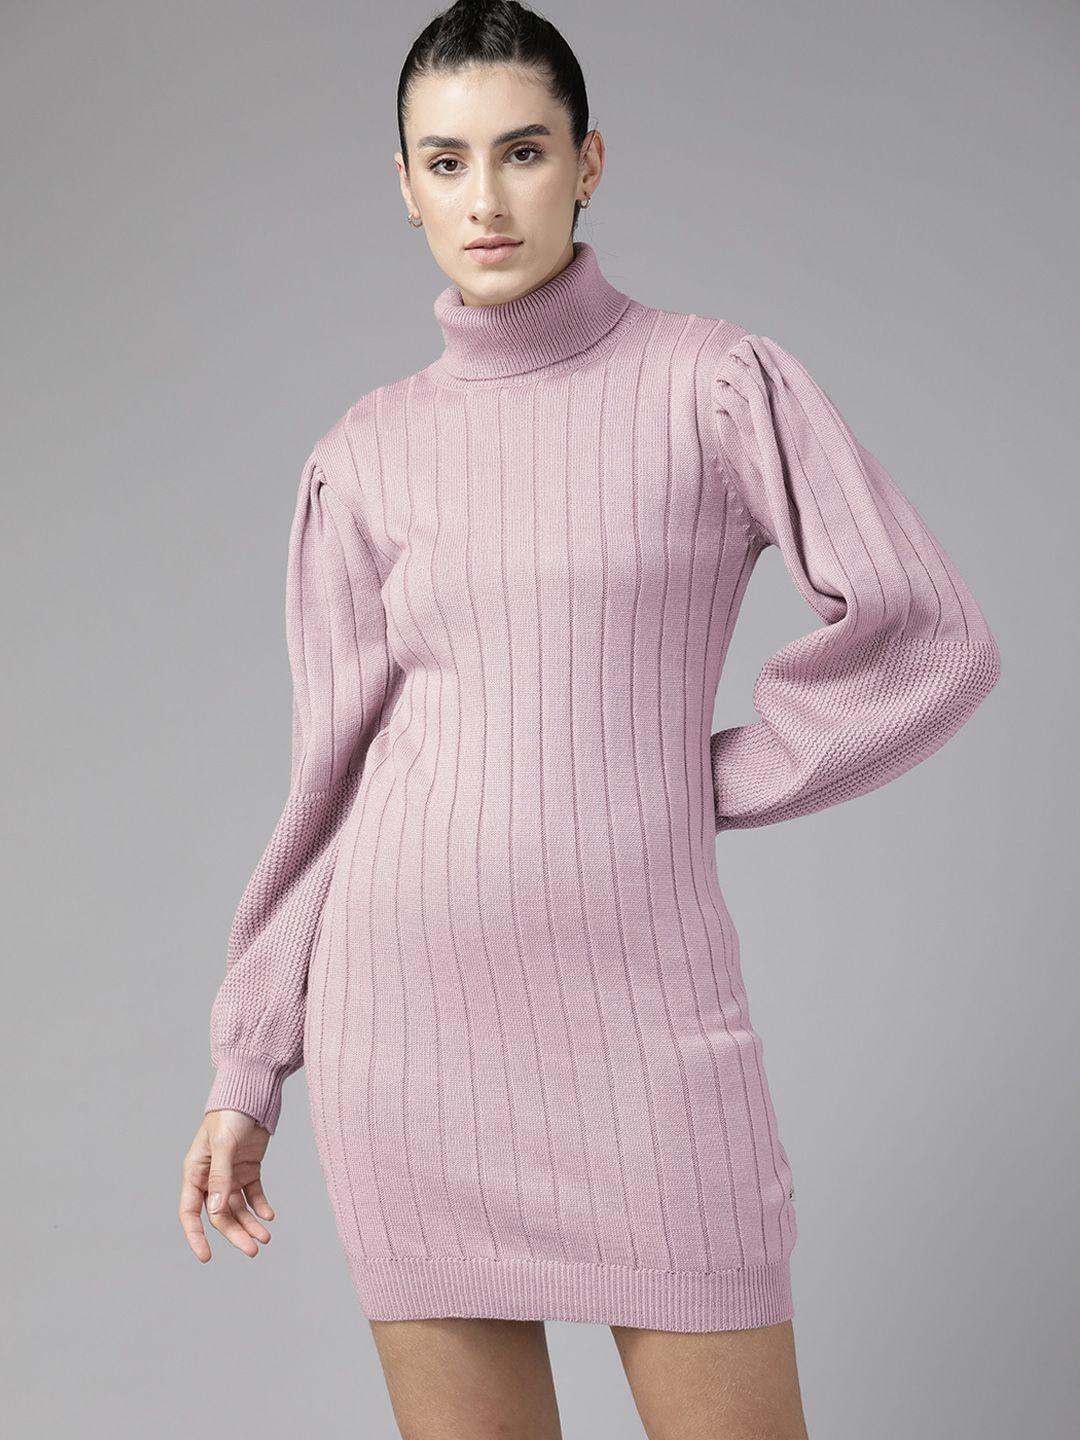 the roadster lifestyle co. turtle neck puff sleeves solid acrylic jumper dress